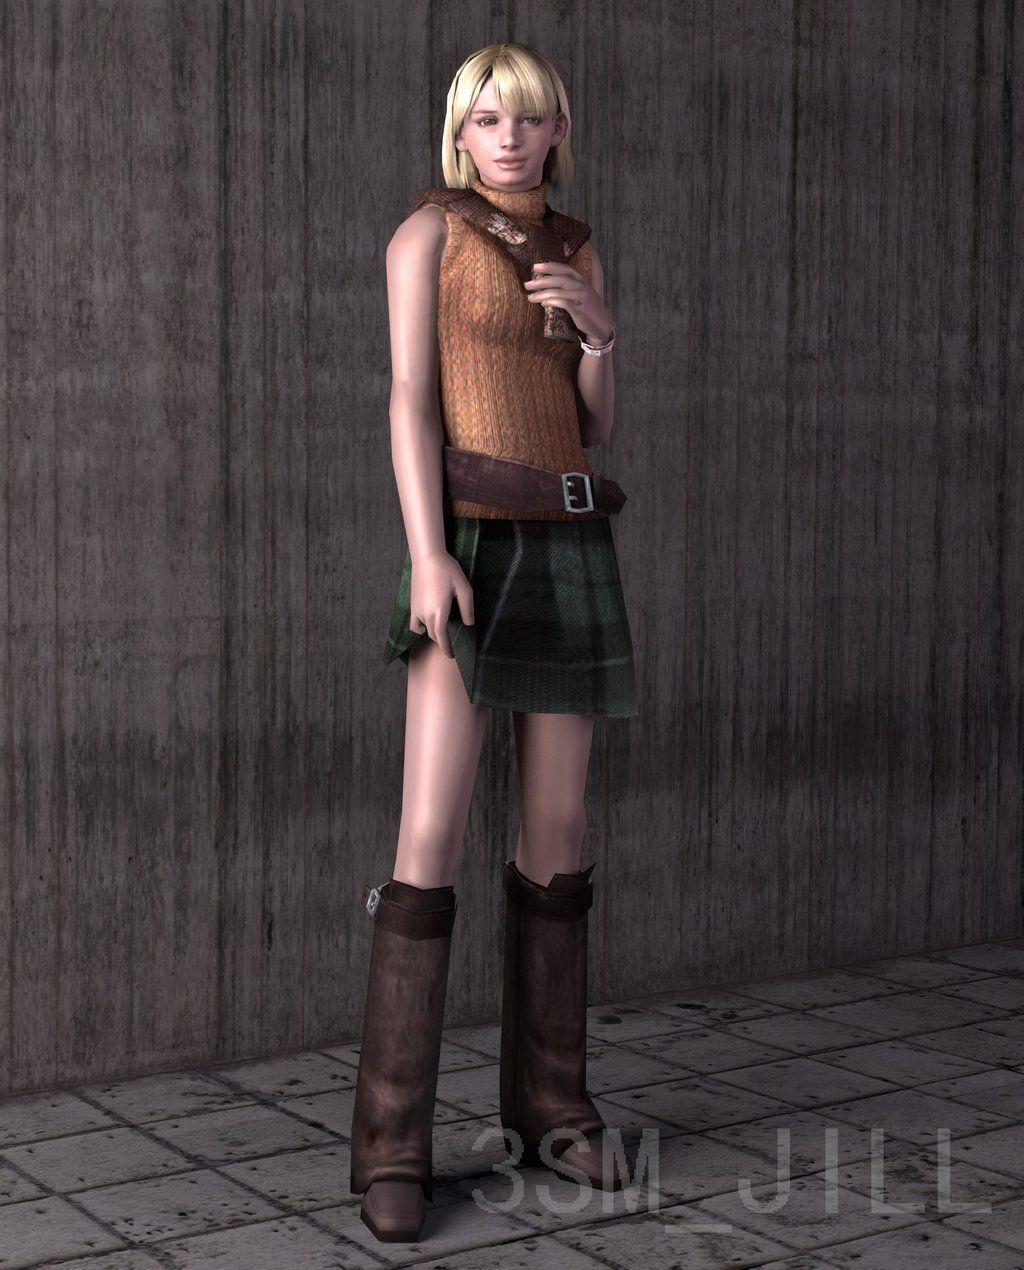 Download Ashley Graham In Her Iconic Outfit From Resident Evil 4 Wallpaper